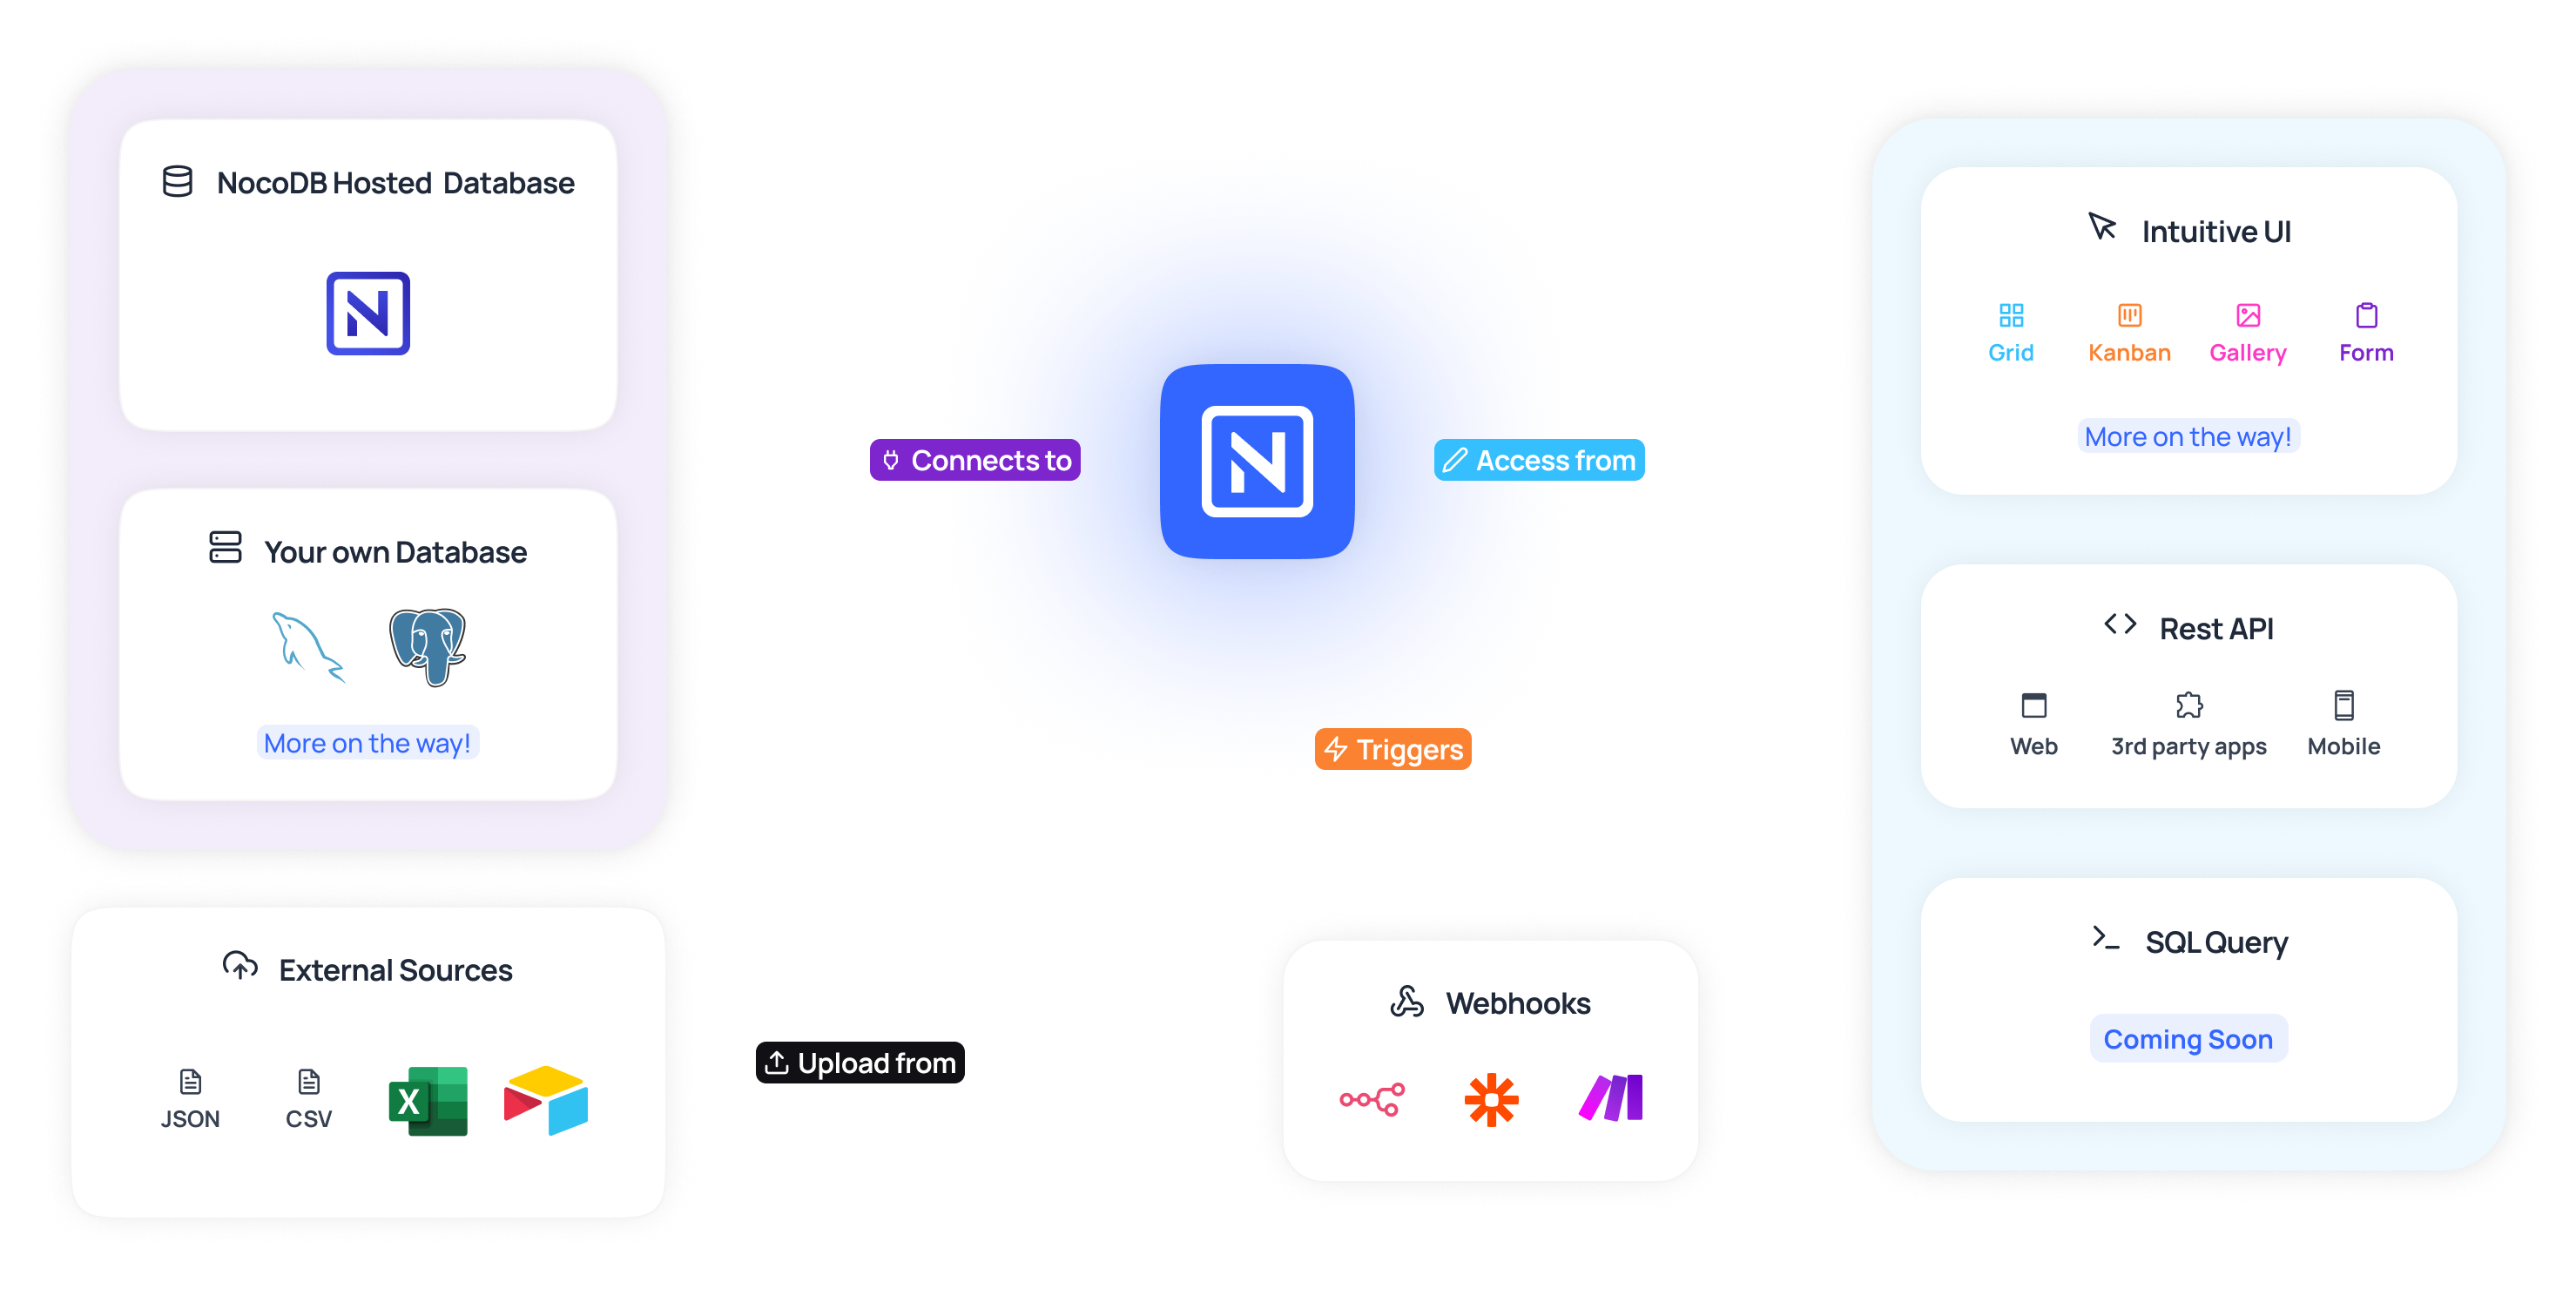 Product map